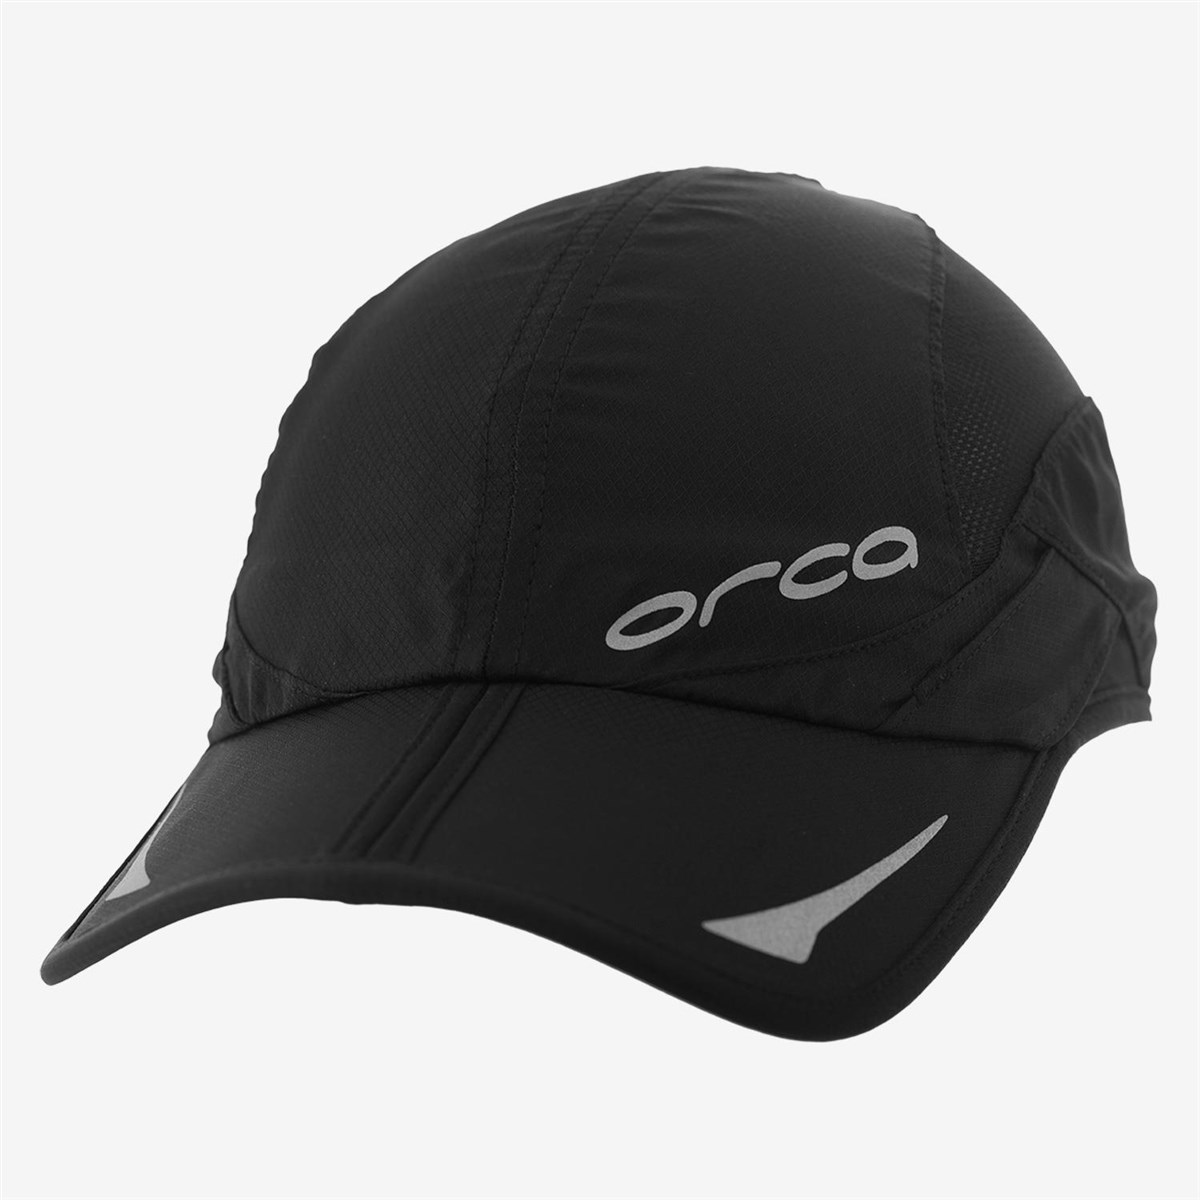 Orca Cap with Foldable System product image